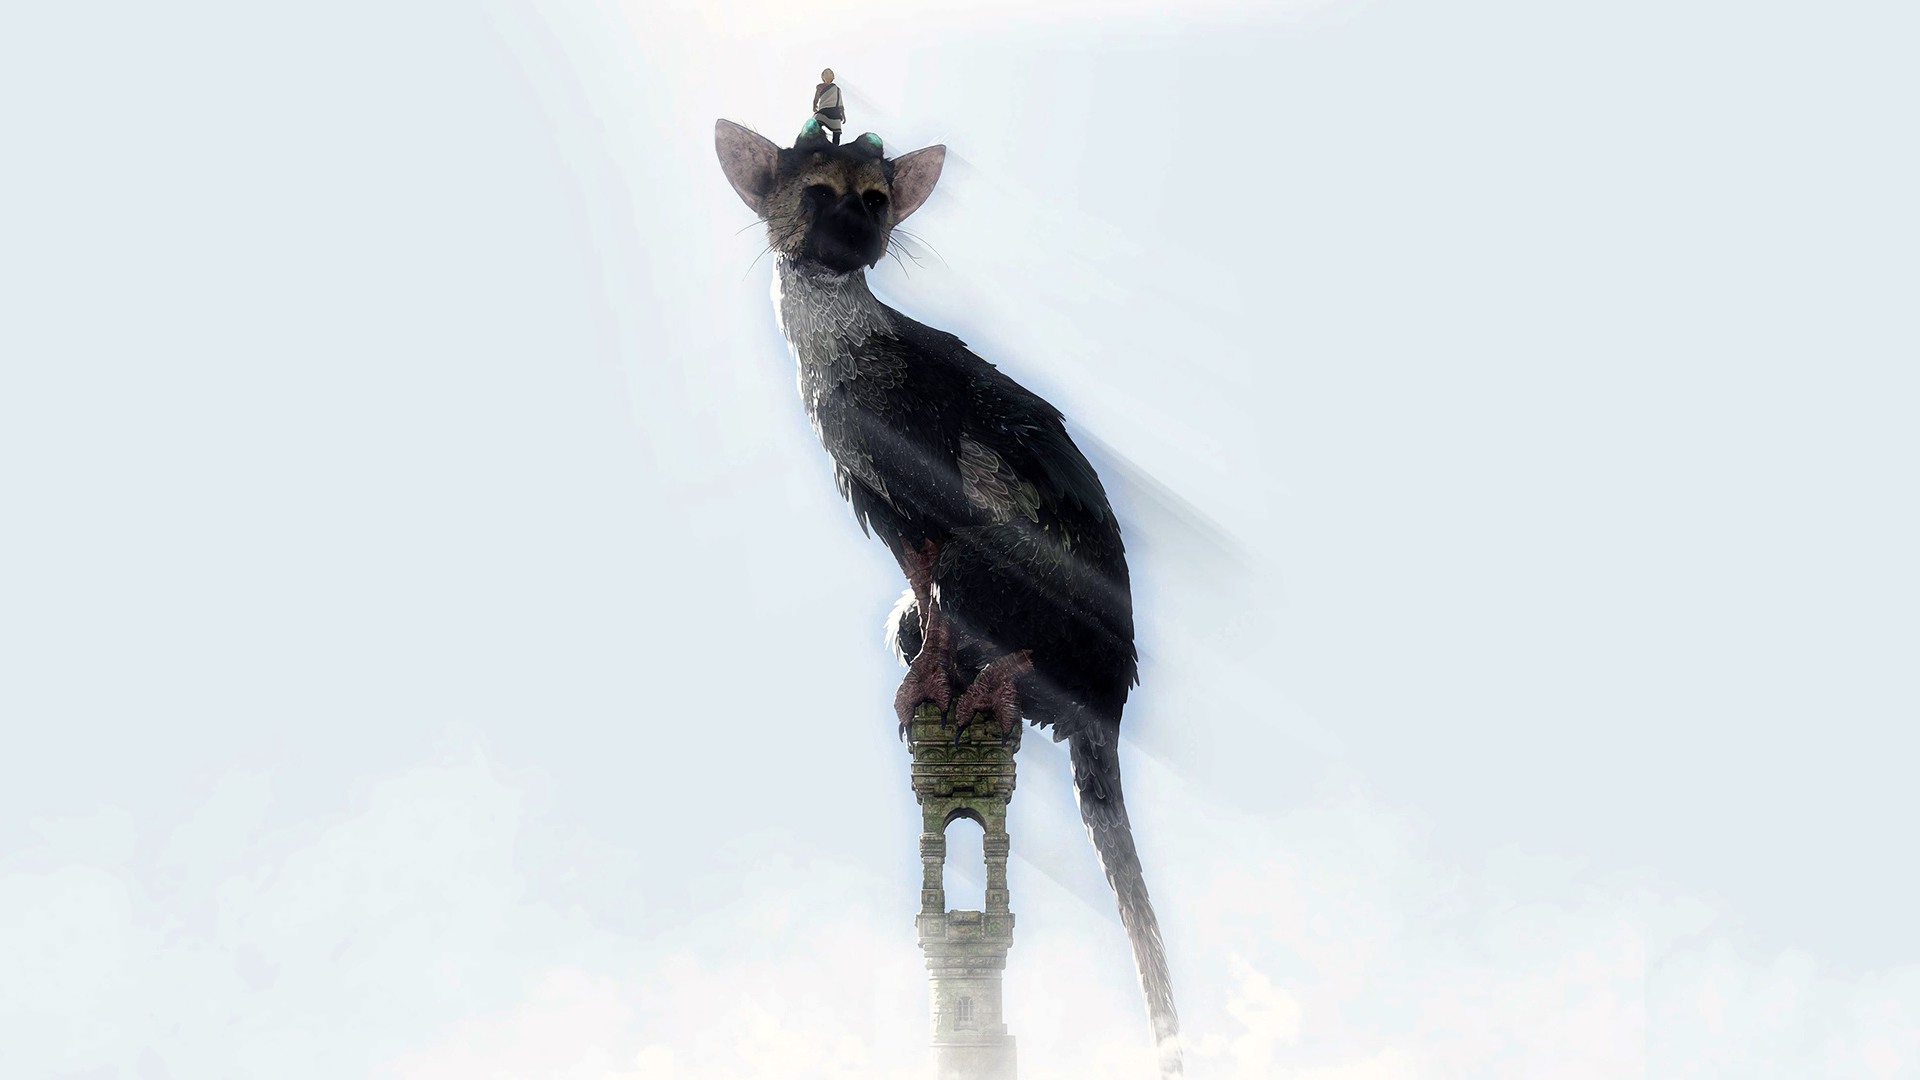 Video Game The Last Guardian Wallpaper